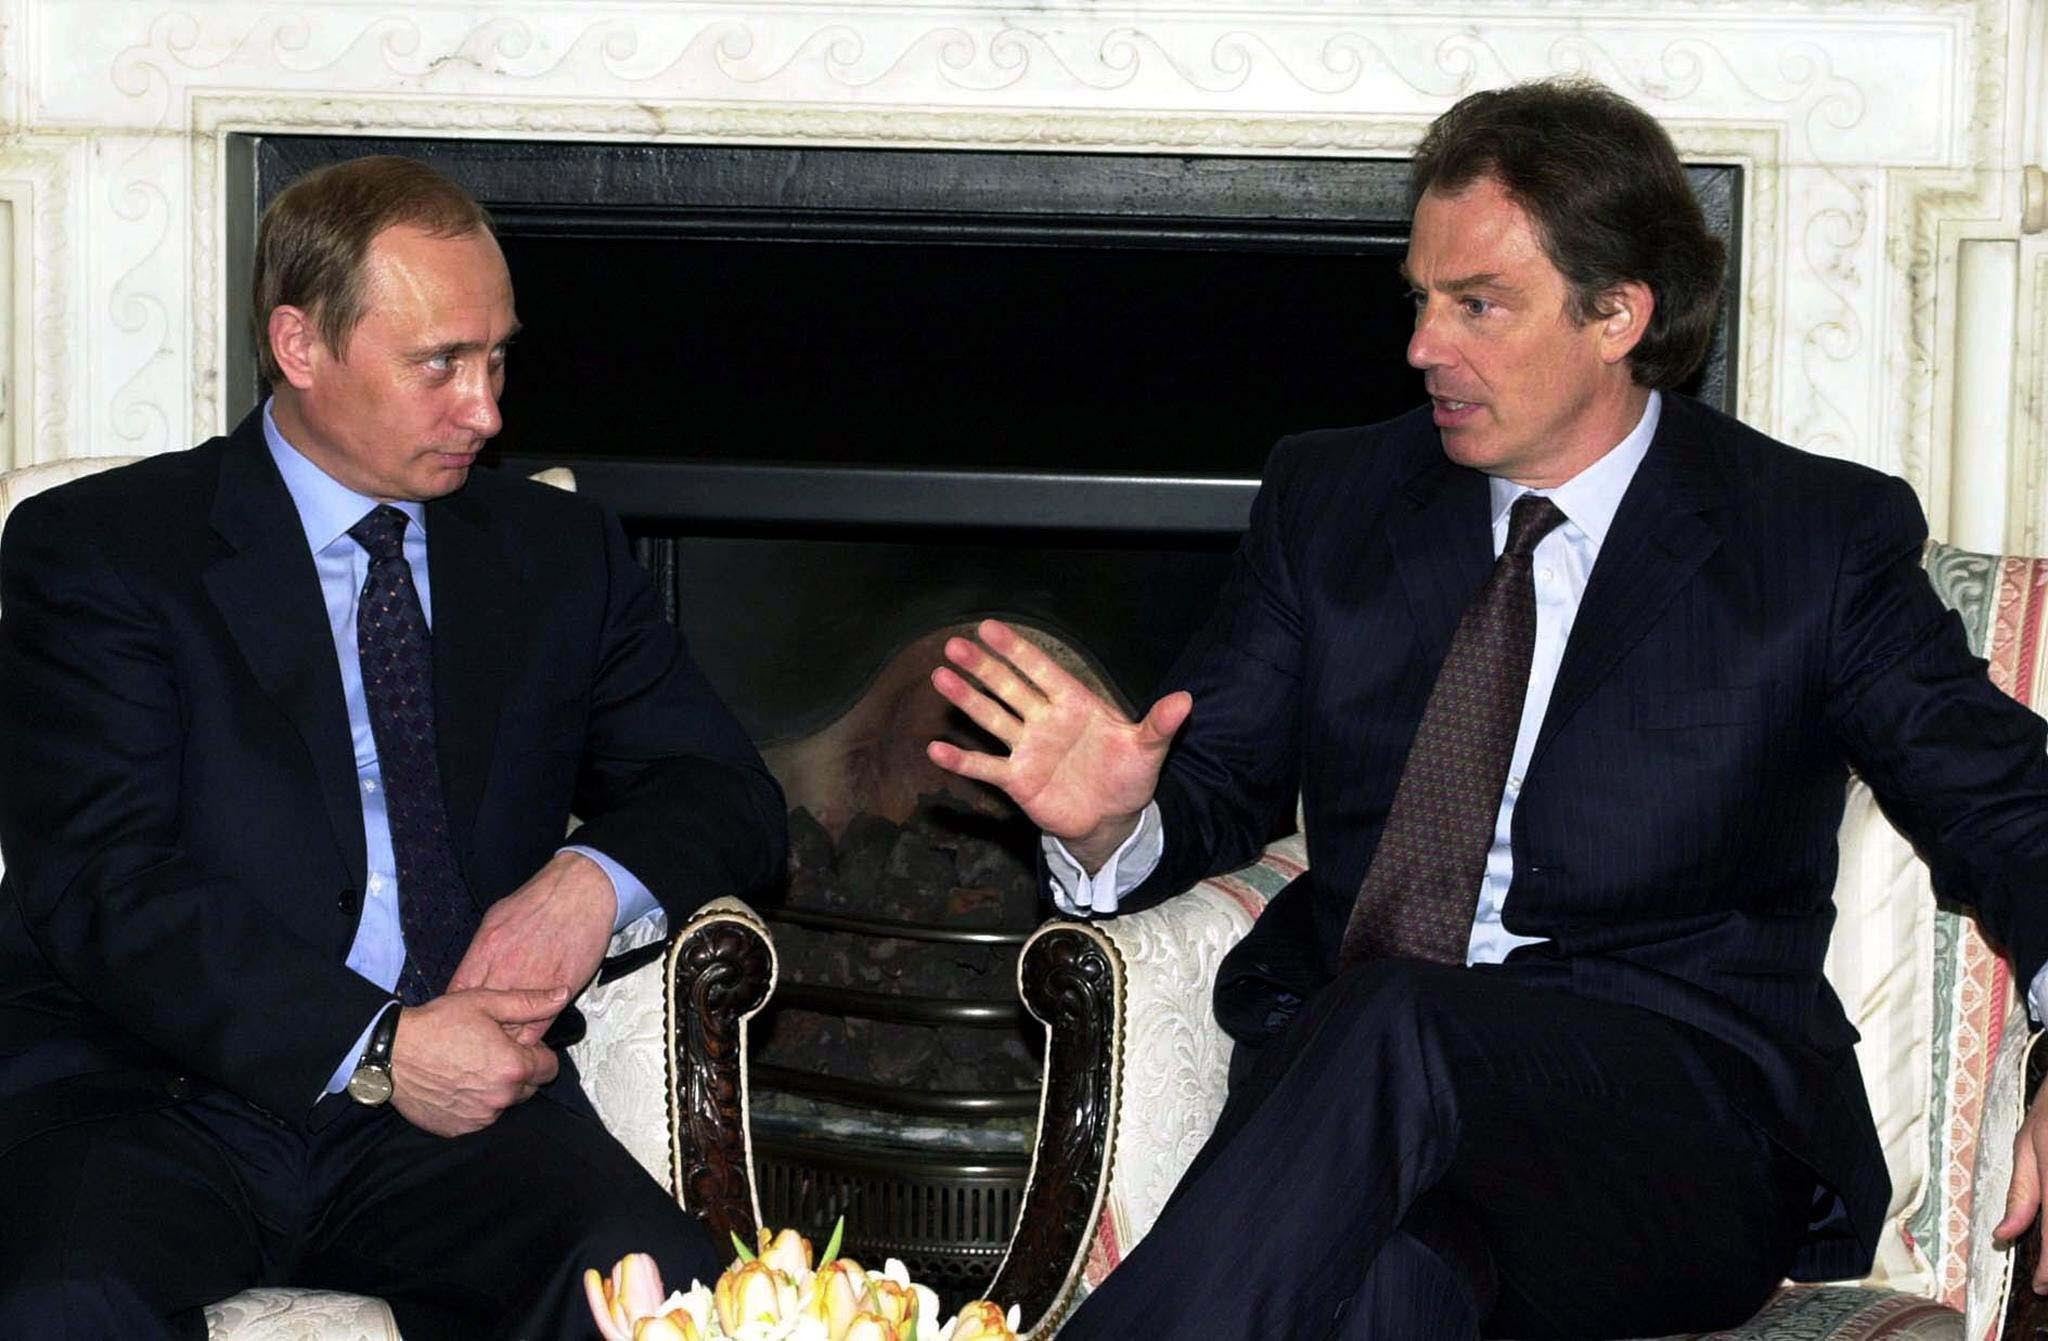 The then prime minister argued that Putin should be given a seat at the international ‘top table’